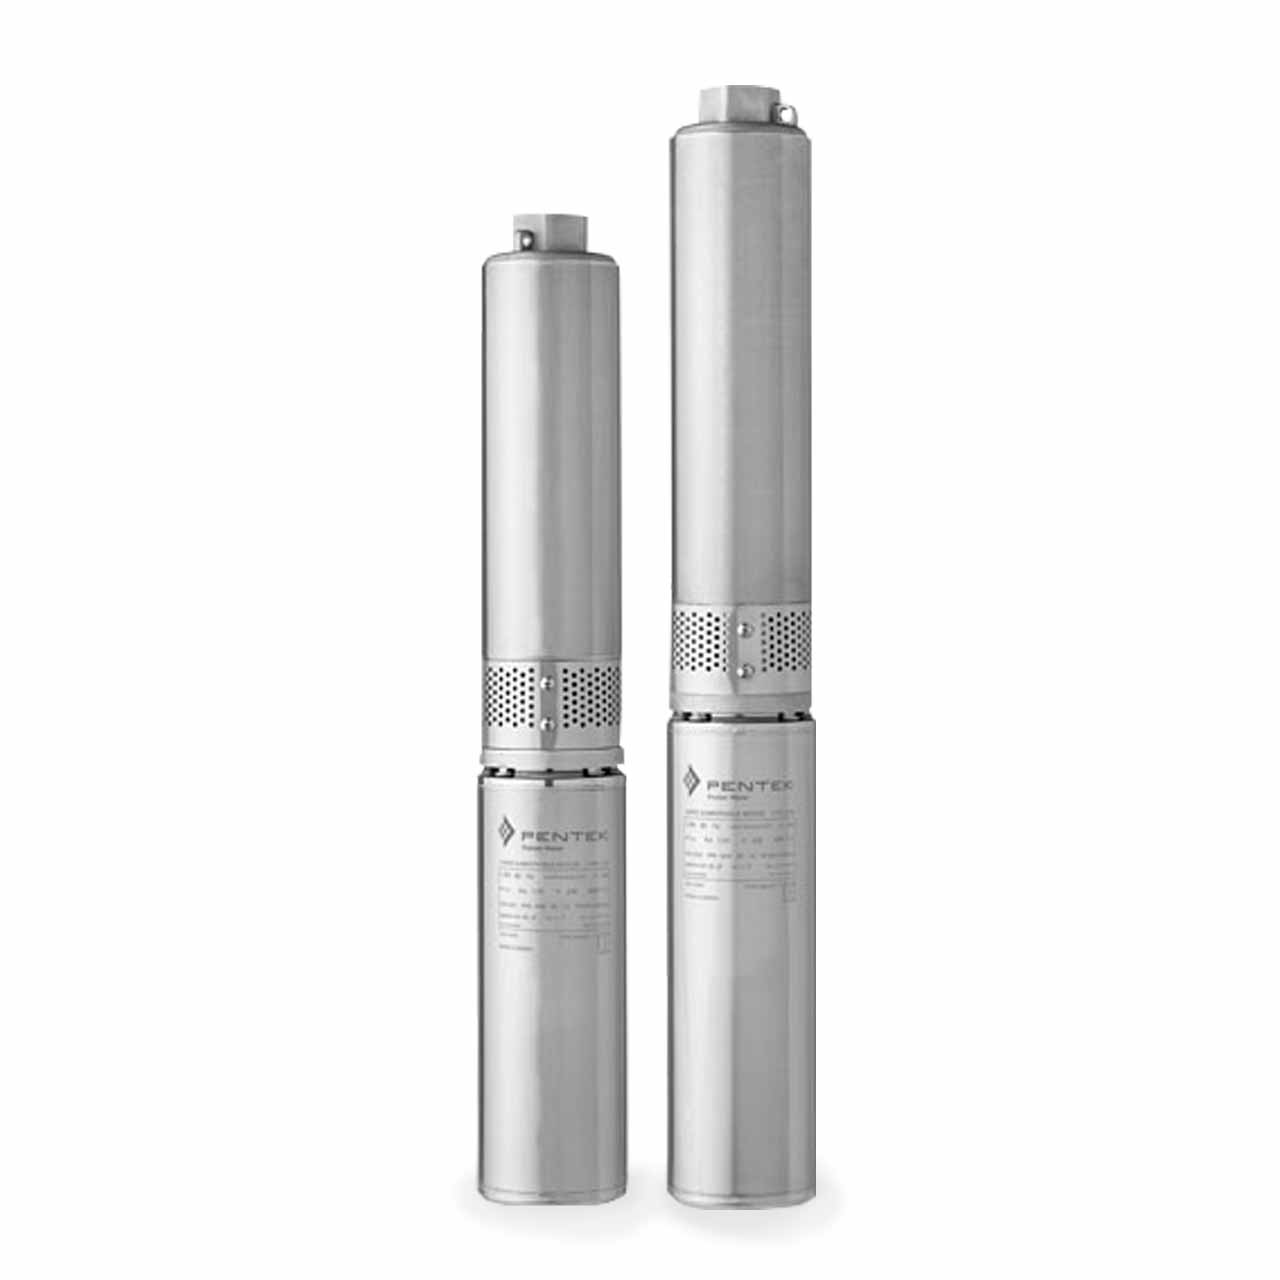 Myers 2ST102-25PLUS-P4 Submersible Stainless Steel Pump 25 GPM 1.0 HP 230V 2-Wire 1PH